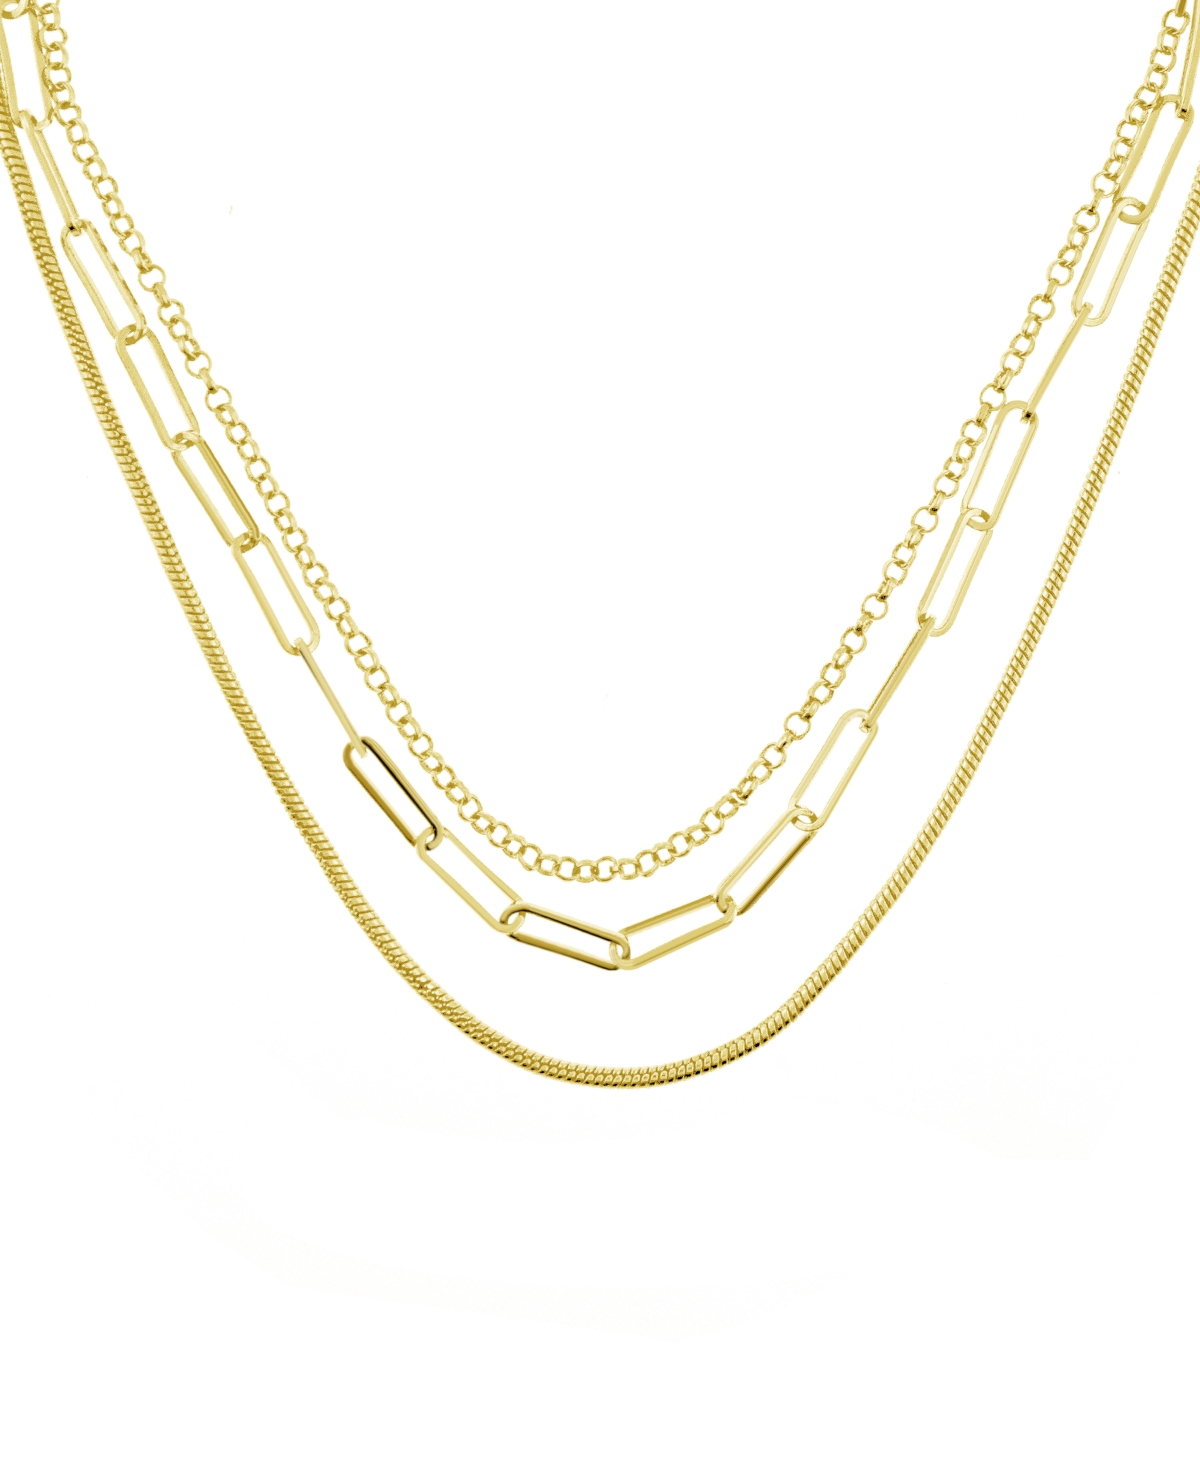 Triple Row 16" Chain Necklace in Silver Plate or Gold Plate - Silver